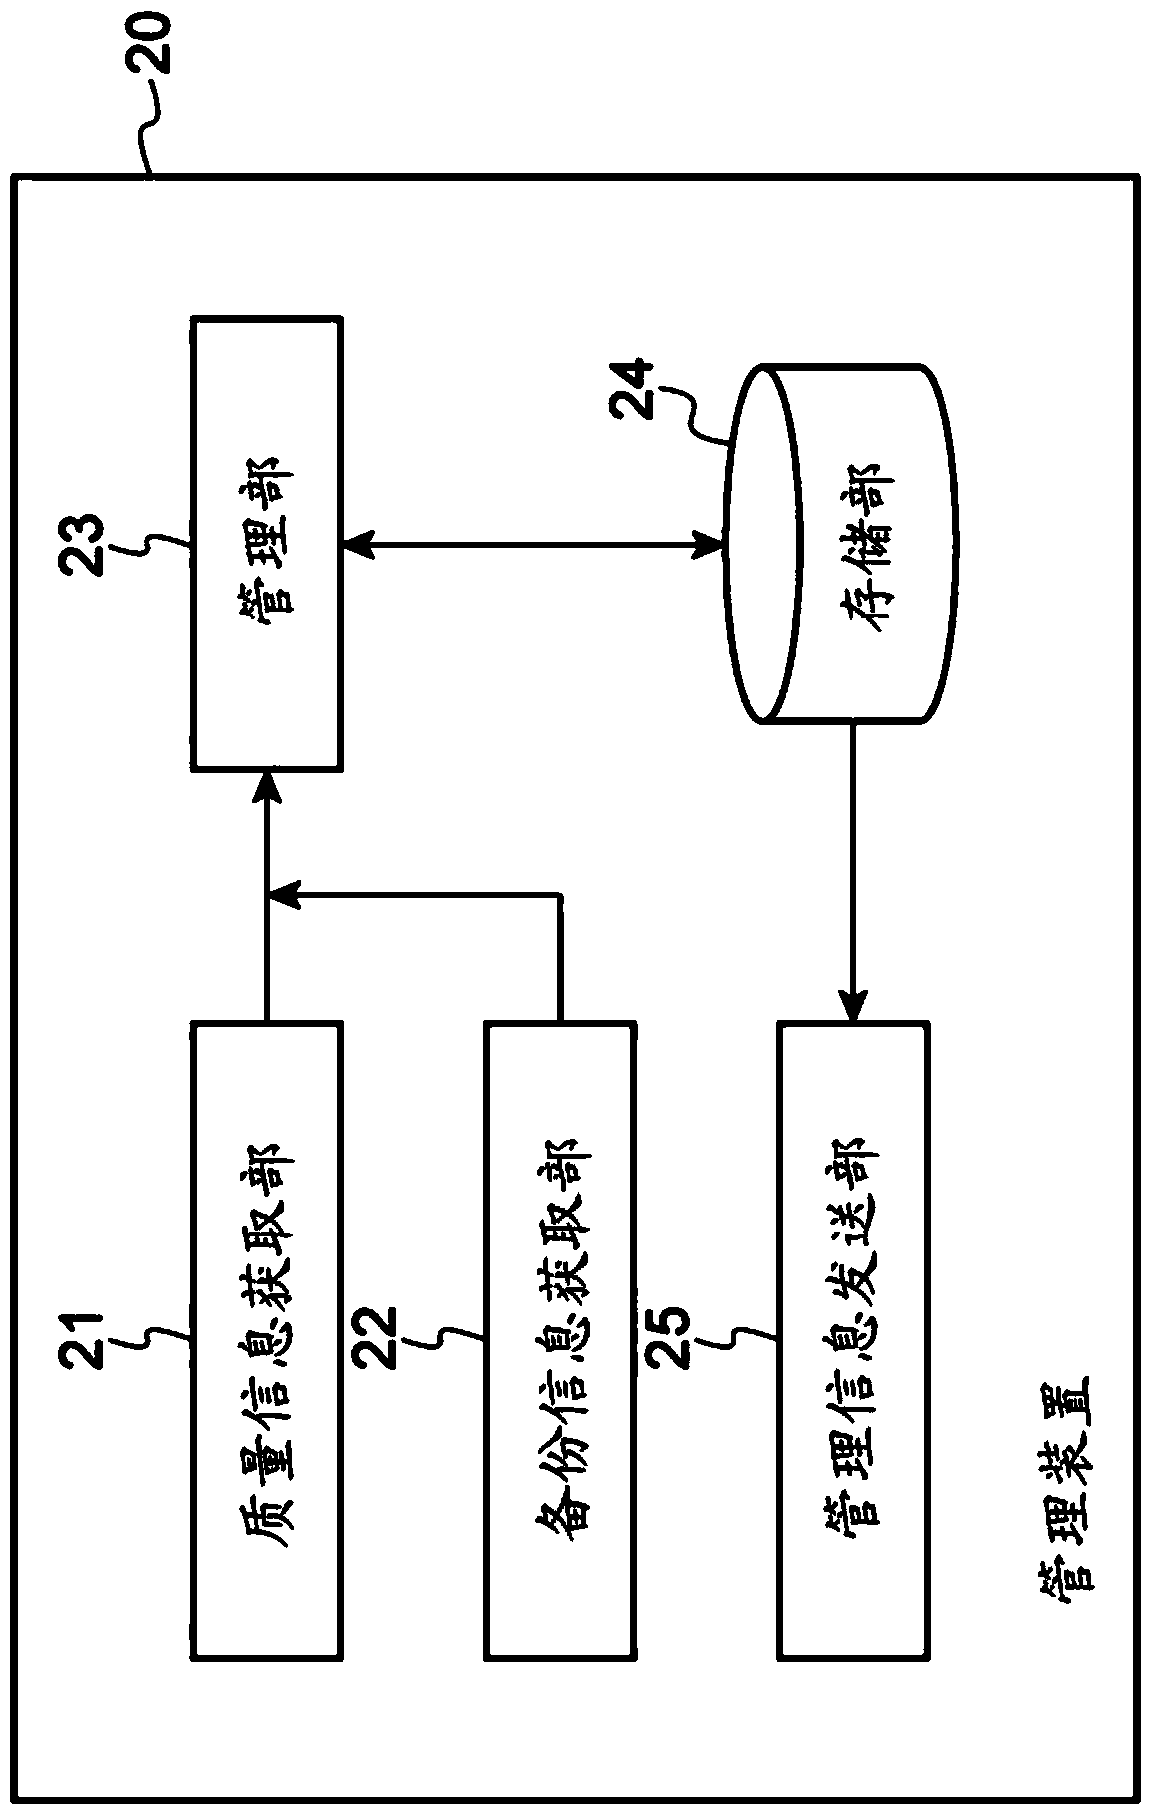 Manufacturing system